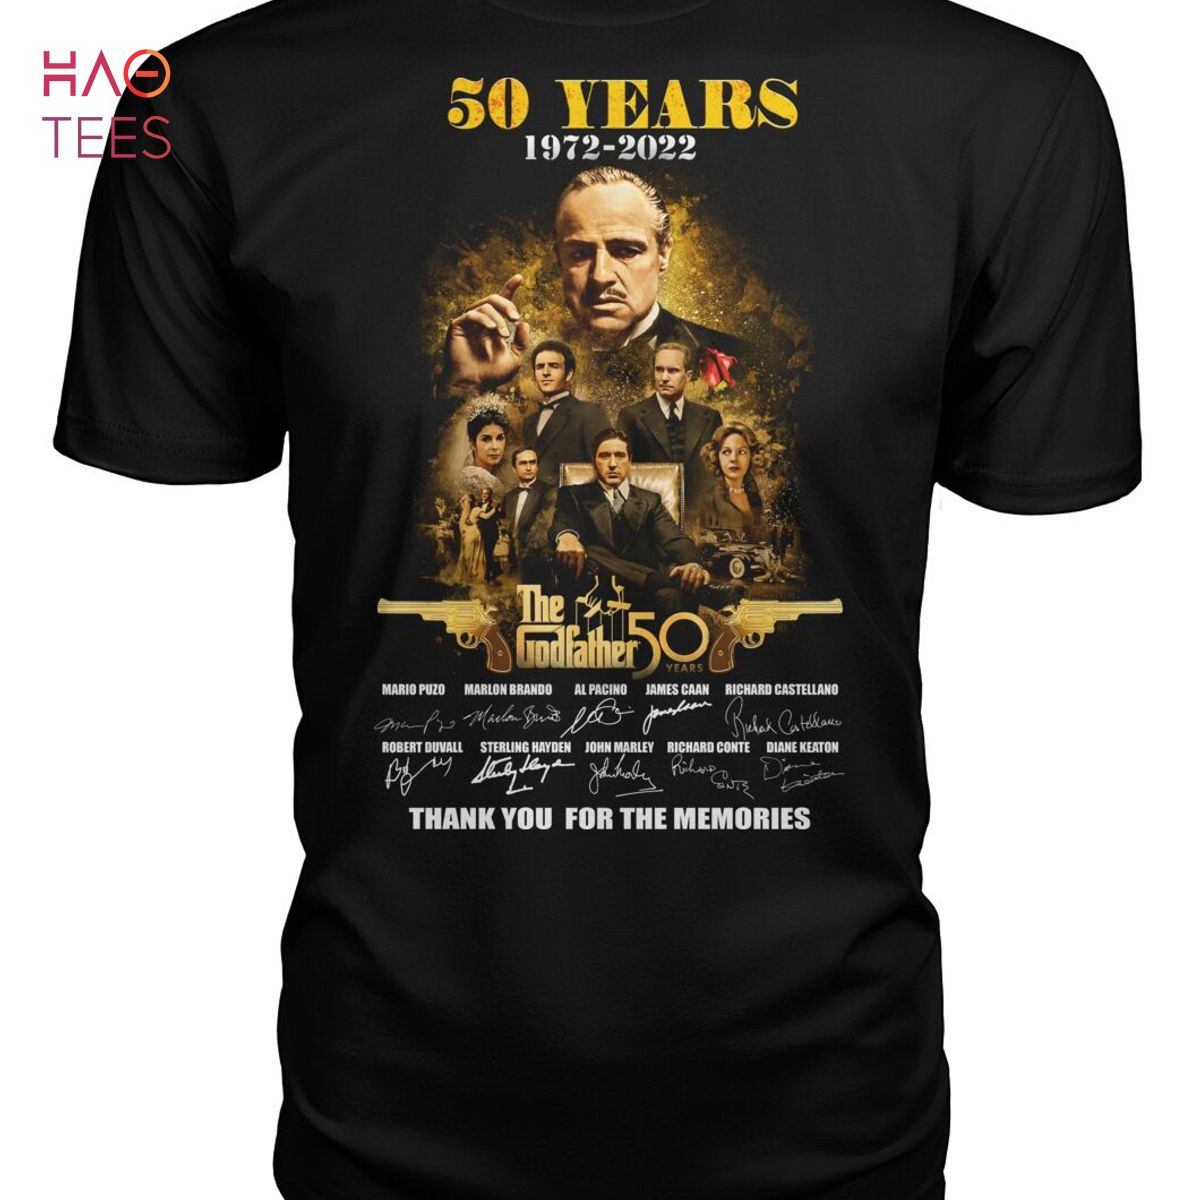 50 Years 1972-2022 The Godfather Shirt